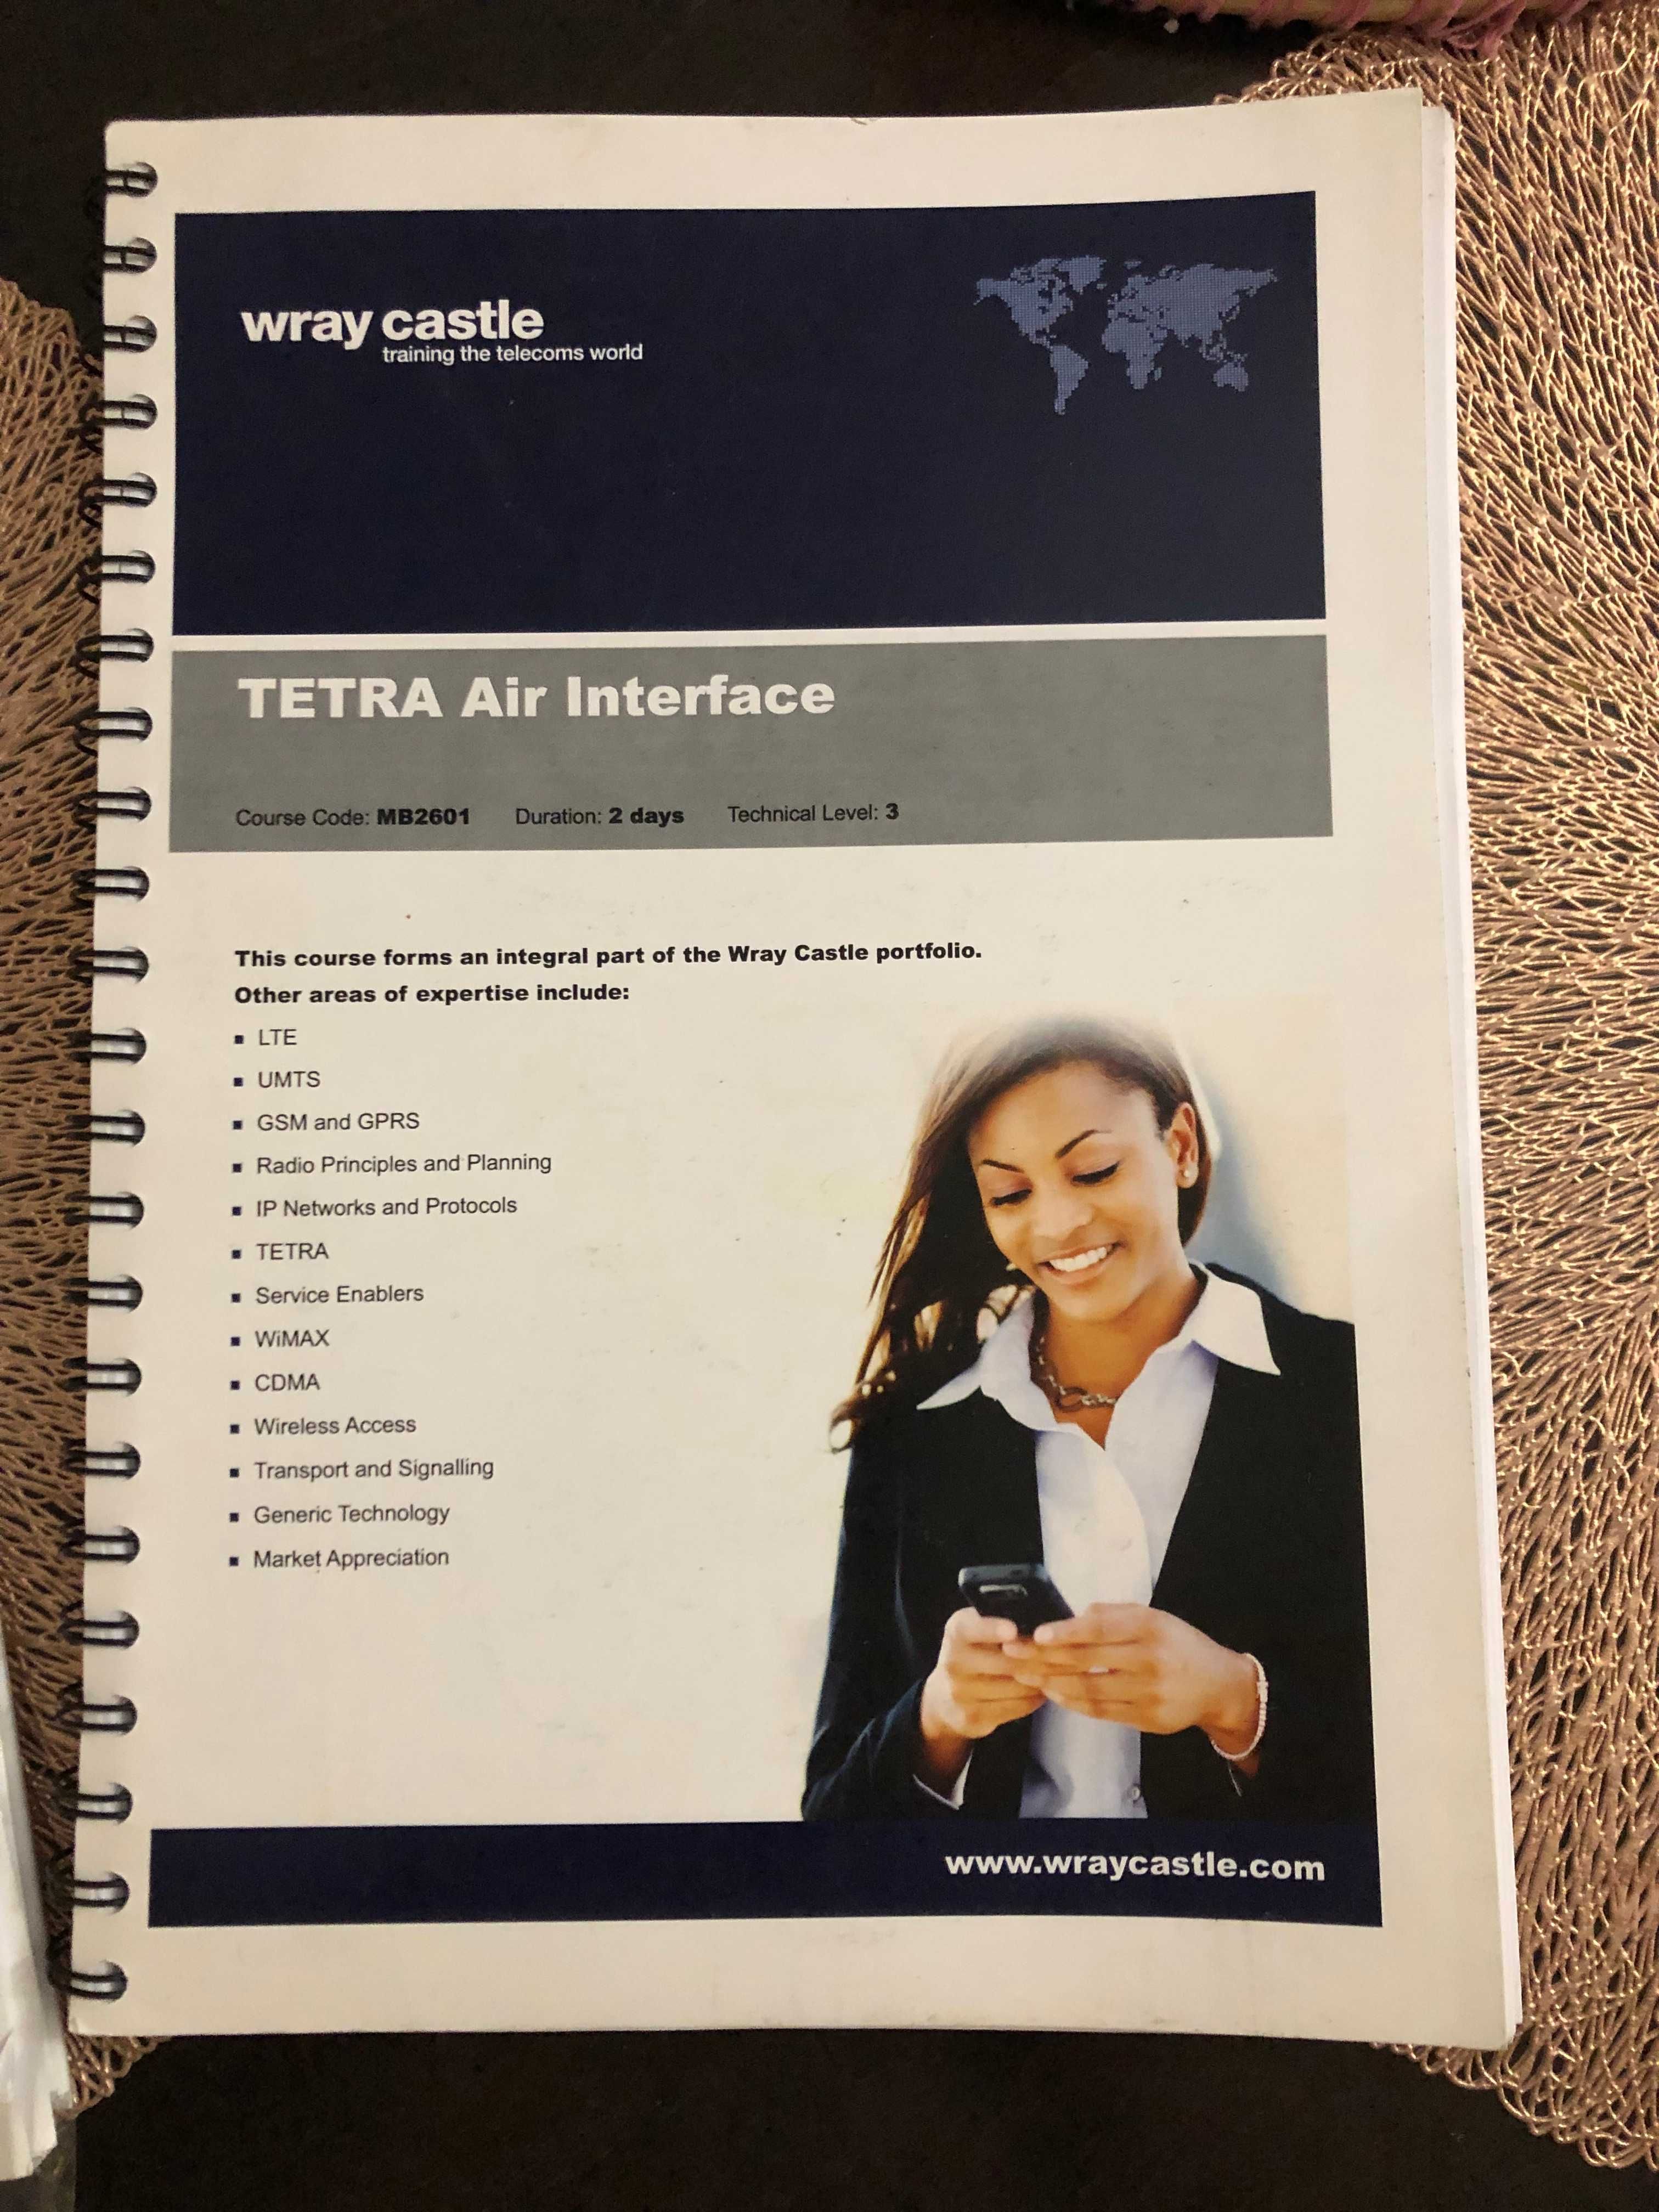 TETRA air interface by Wray Castle